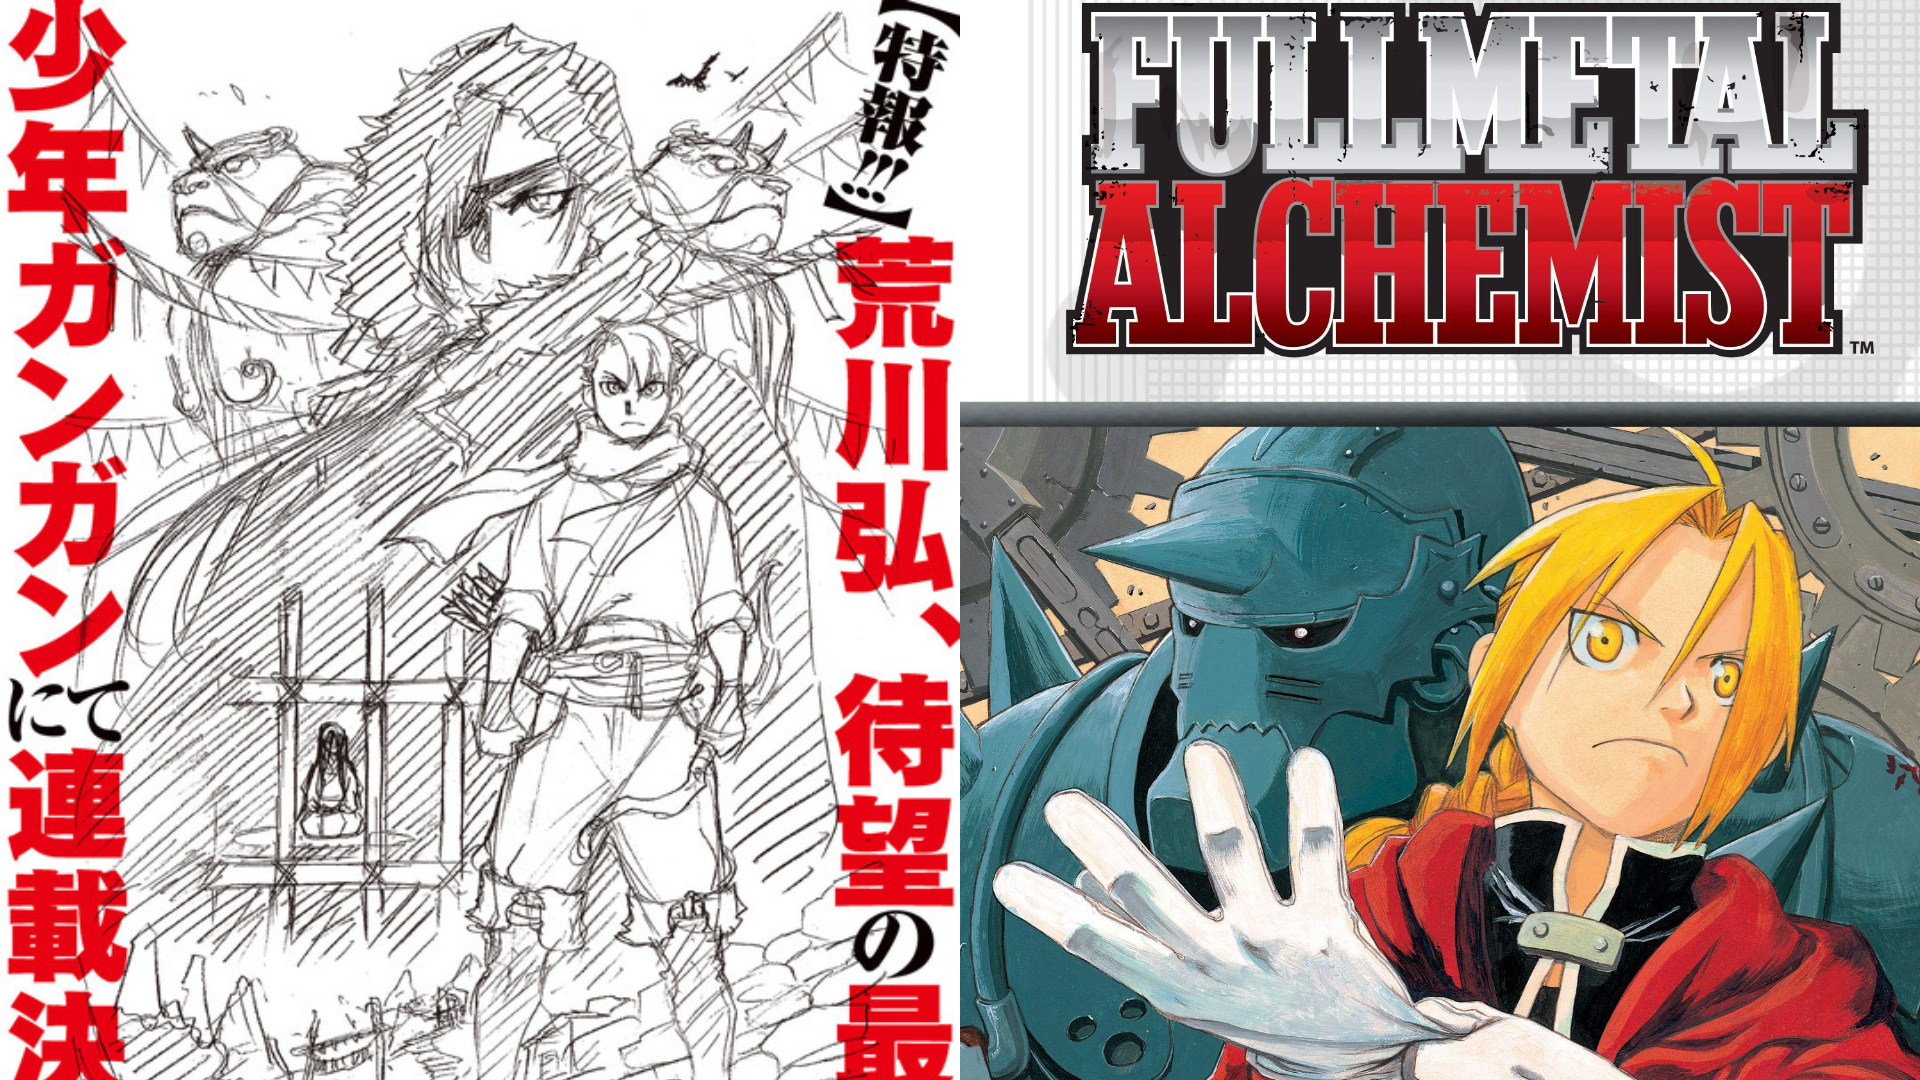 Is The Live-Action Fullmetal Alchemist Movie Any Good? - Anime News Network